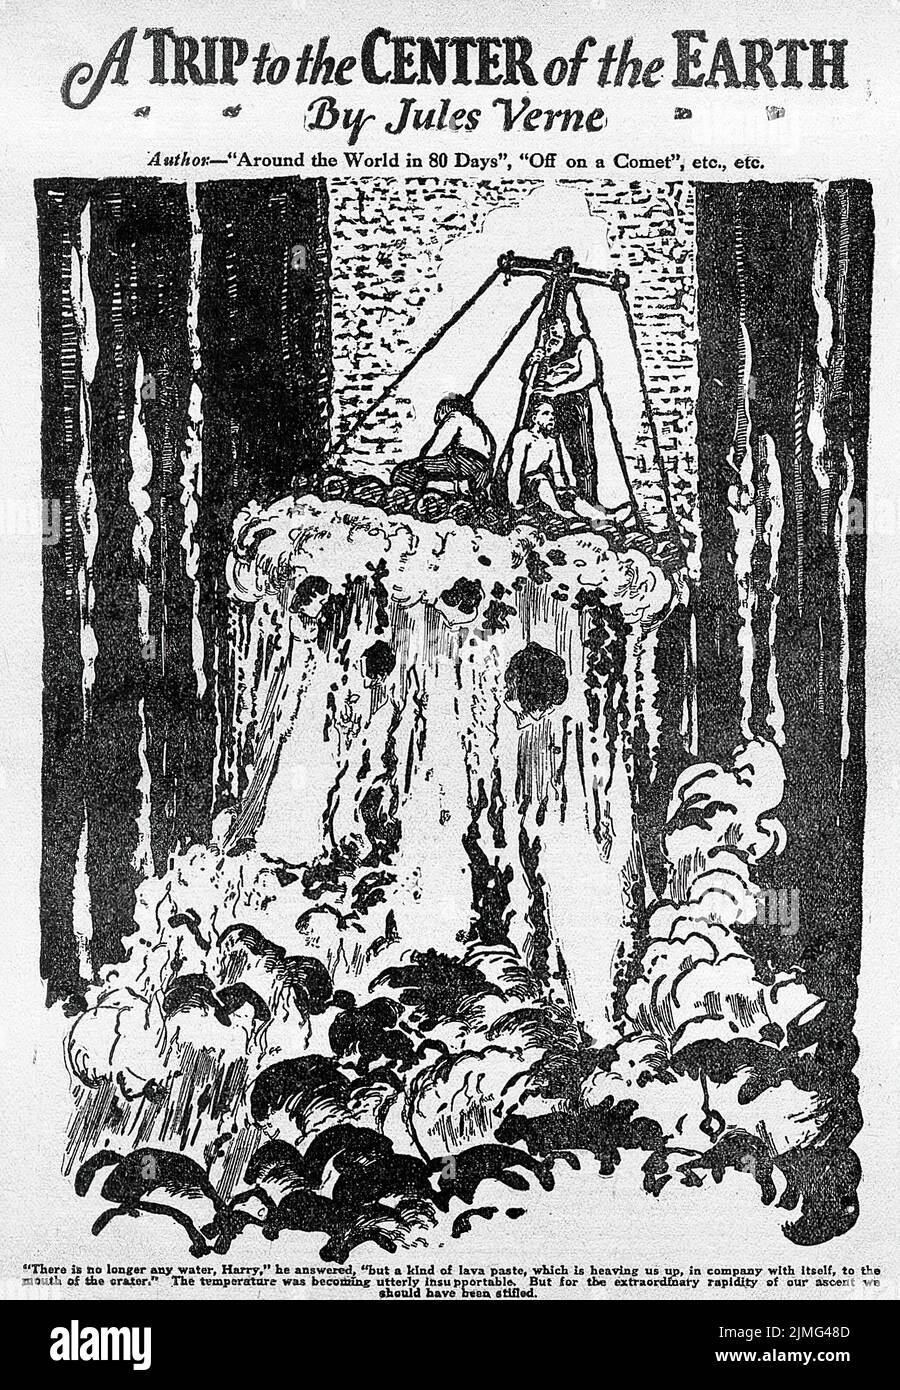 A Trip to the Center of the Earth (1846) by Jules Verne. Illustration from Amazing Stories, July 1926. Stock Photo